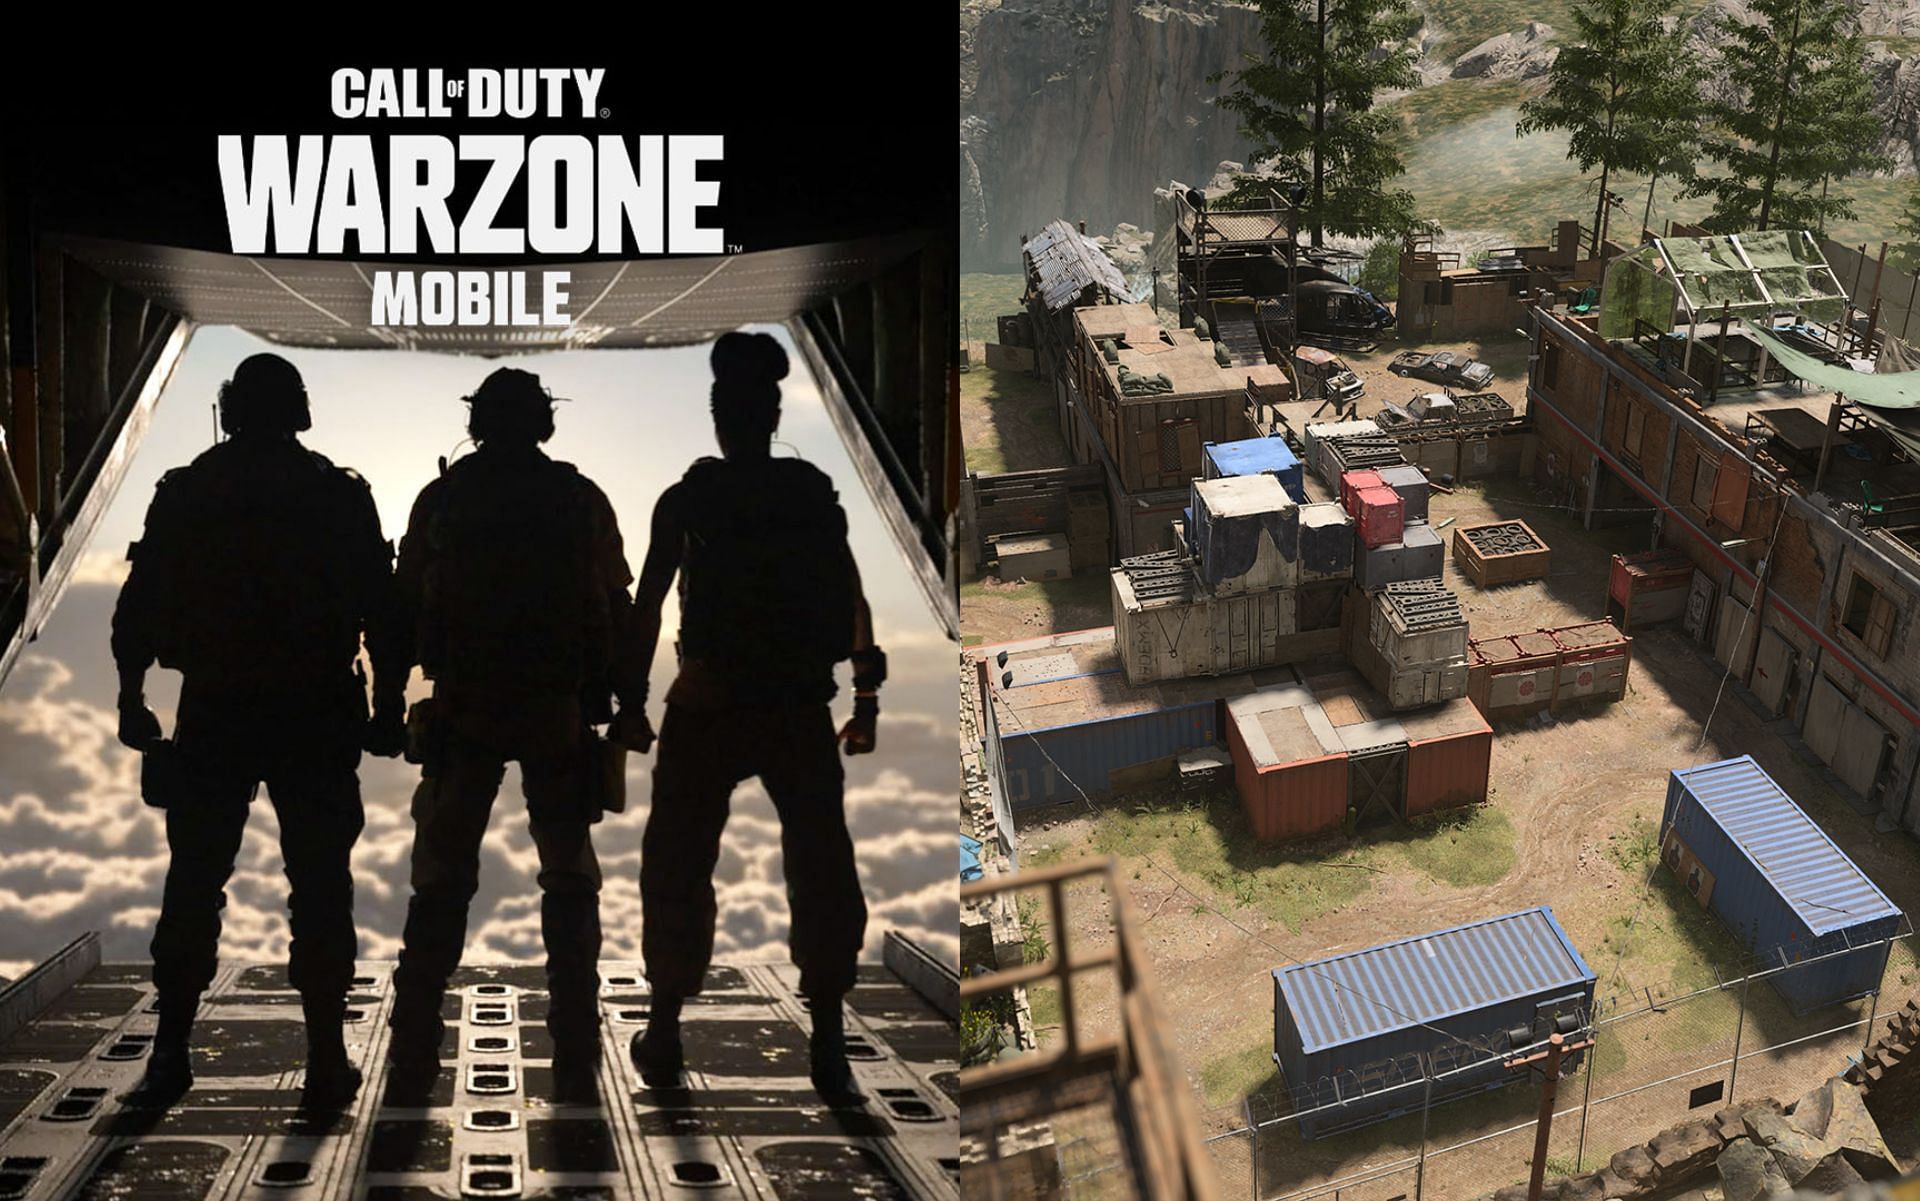 Call of Duty: Warzone Mobile Pre-Orders Available for iOS Users